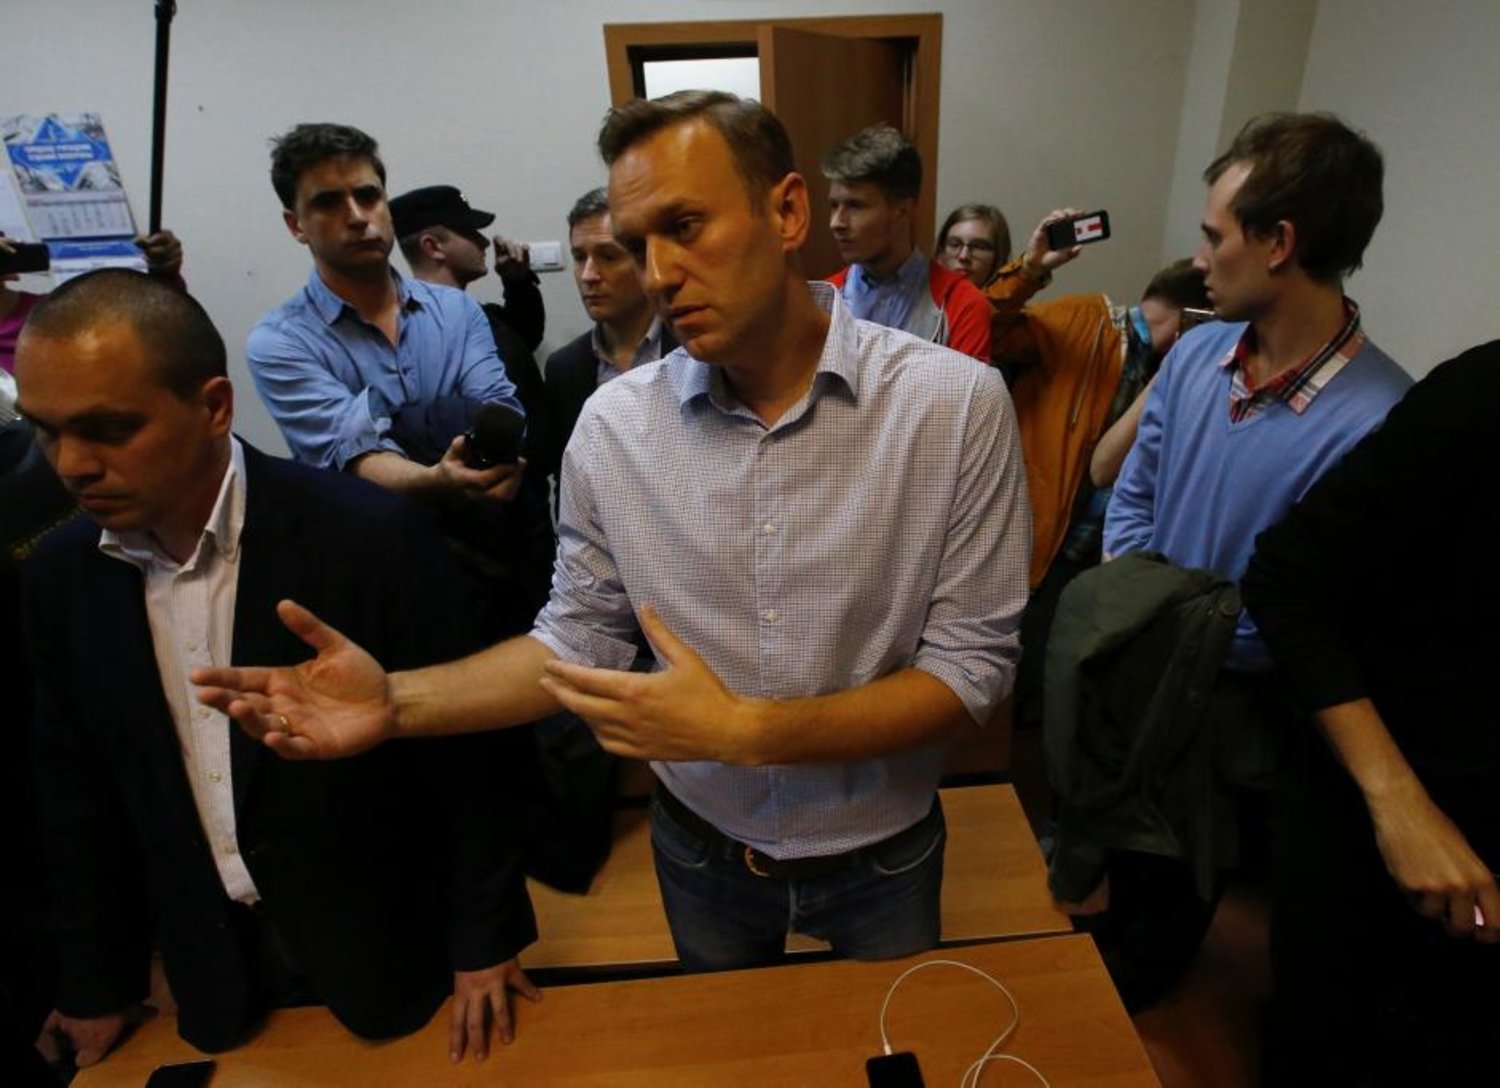 Russian opposition leader Alexei Navalny talks to journalists after he was sentenced to 20 days in jail on charges holding an unsanctioned protest. (Reuters)